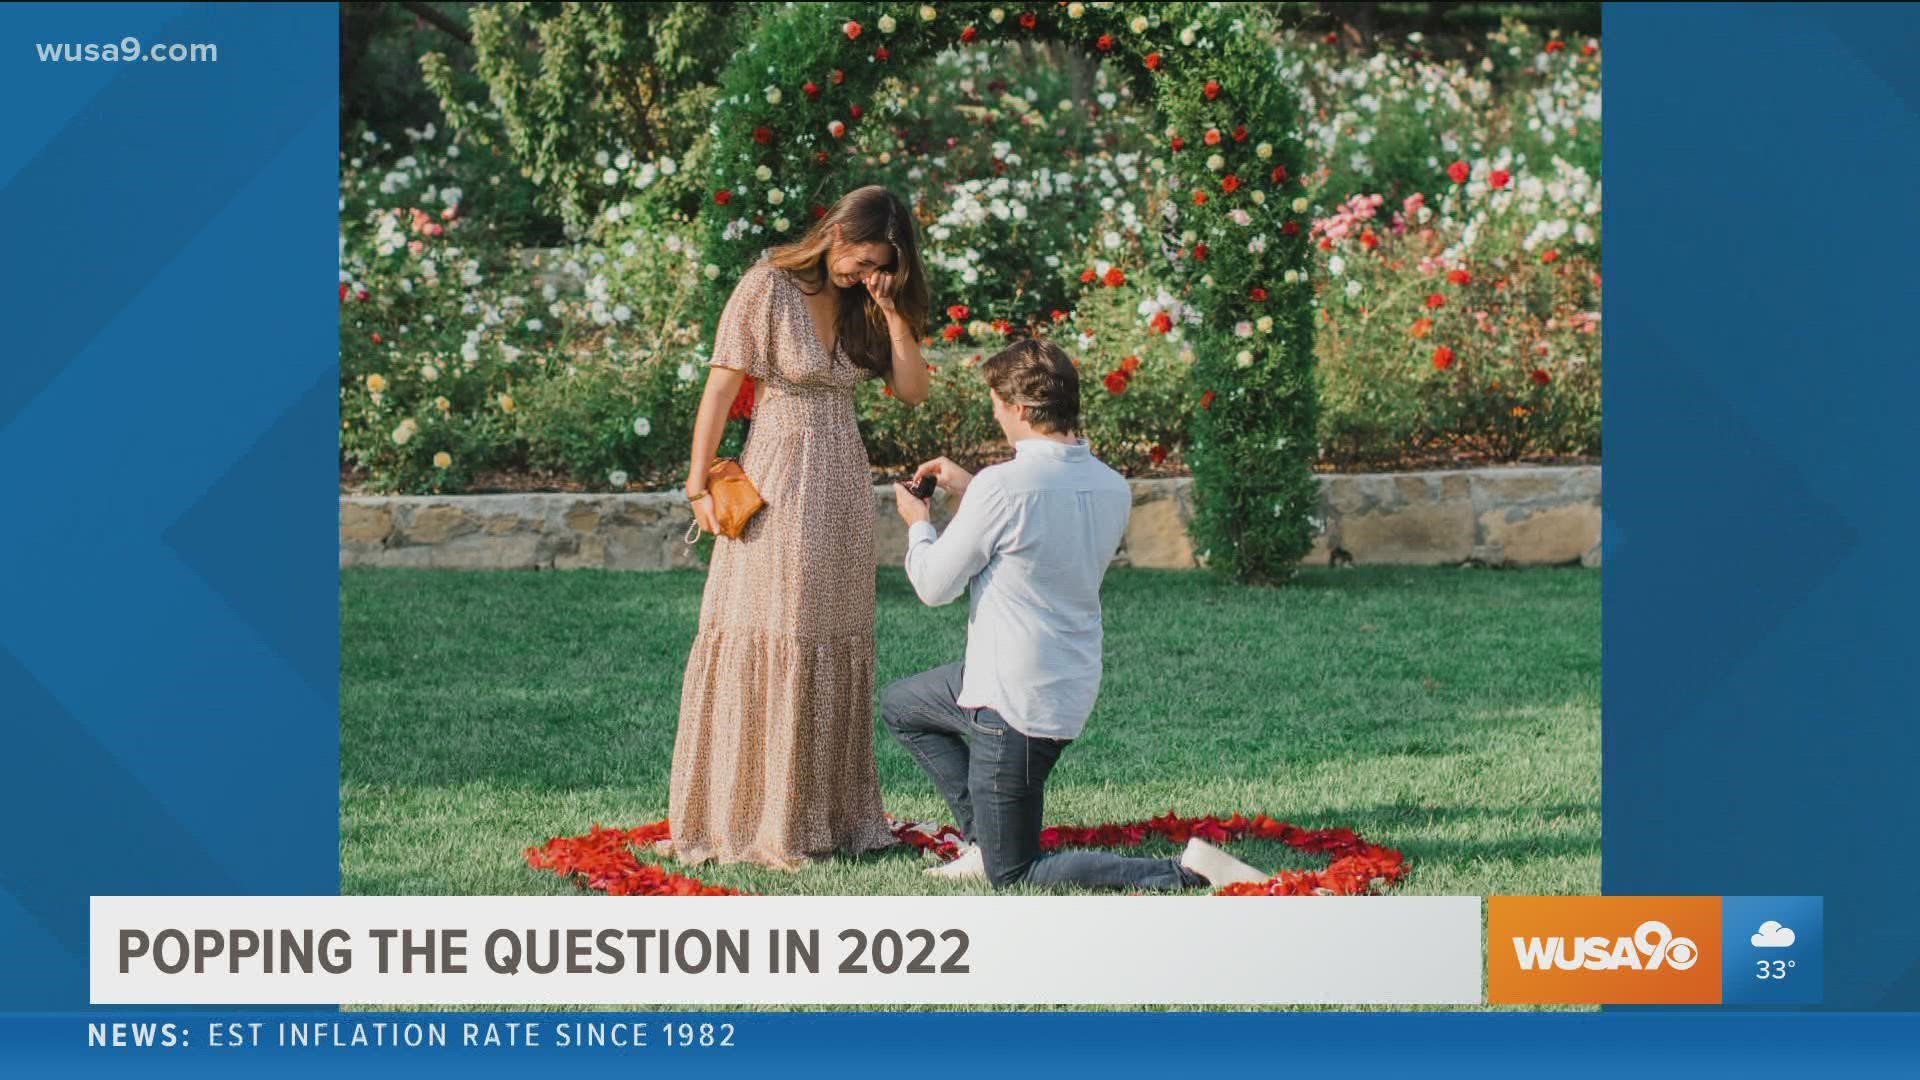 Photographer and lifestyle expert, Anna Costa shares tips on planning the perfect proposal.